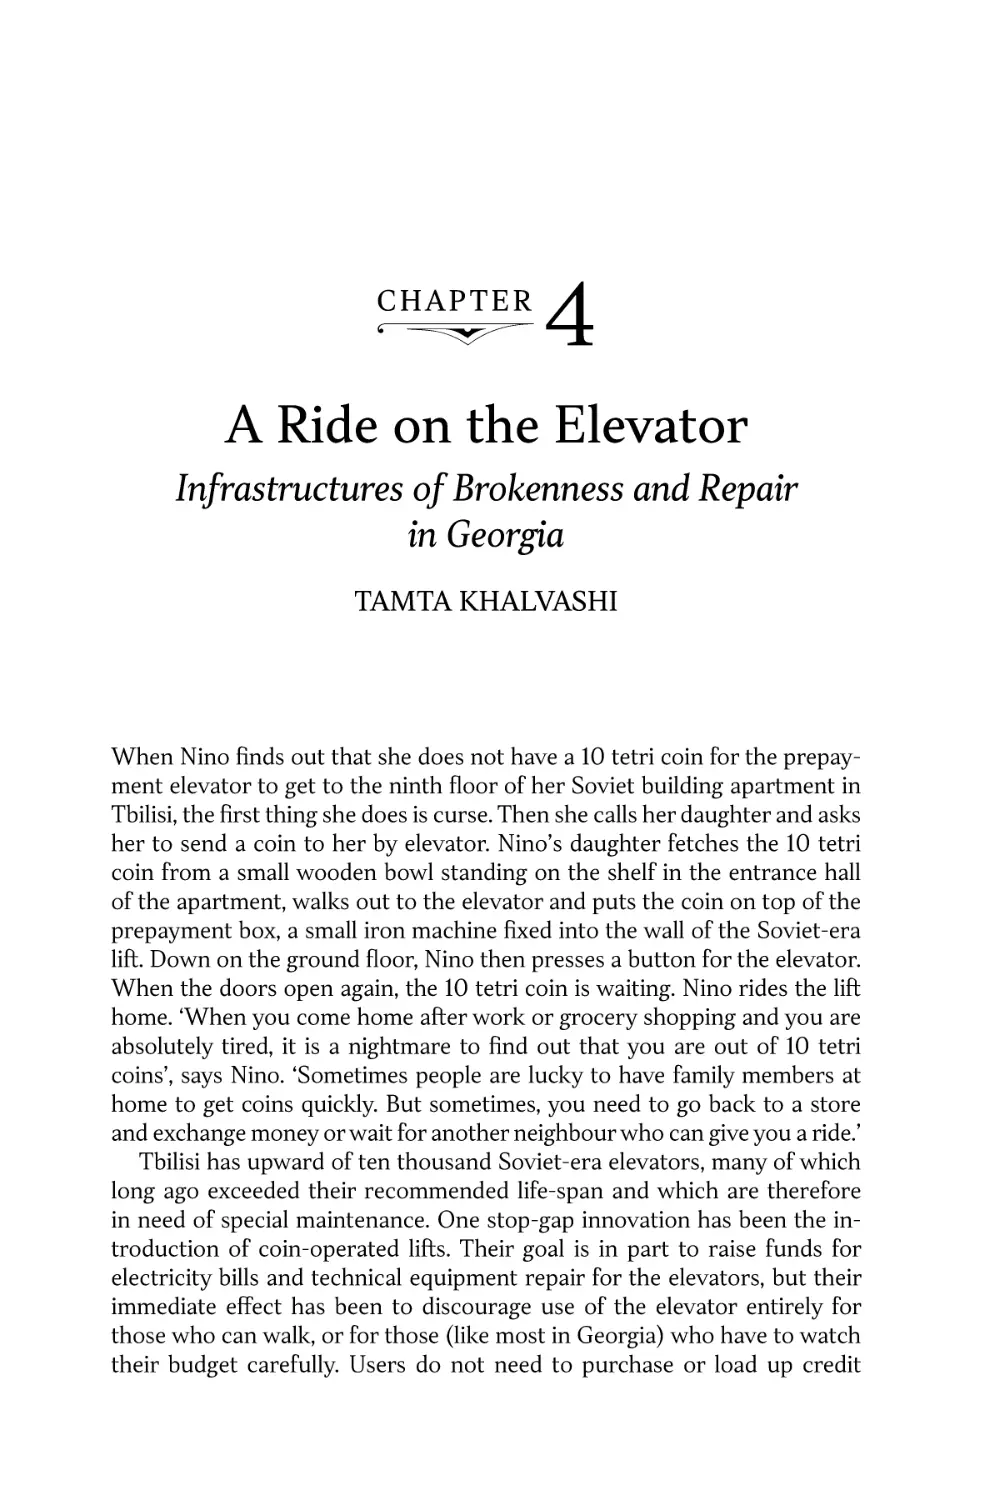 Chapter 4. A Ride on the Elevator